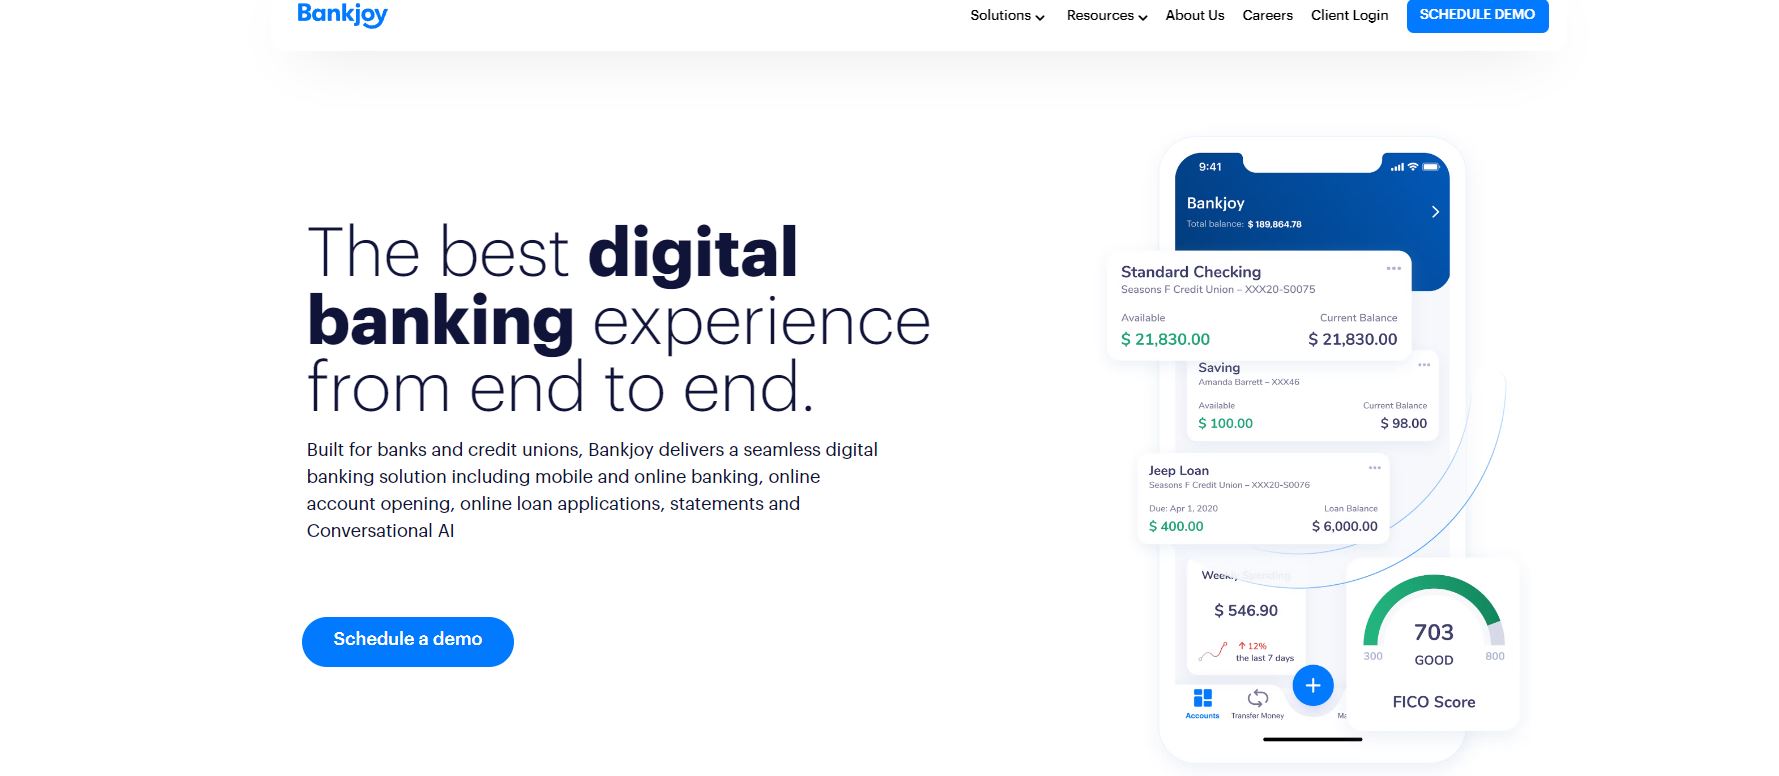 Bankjoy is revolutionizing the banking industry with its modern banking technology